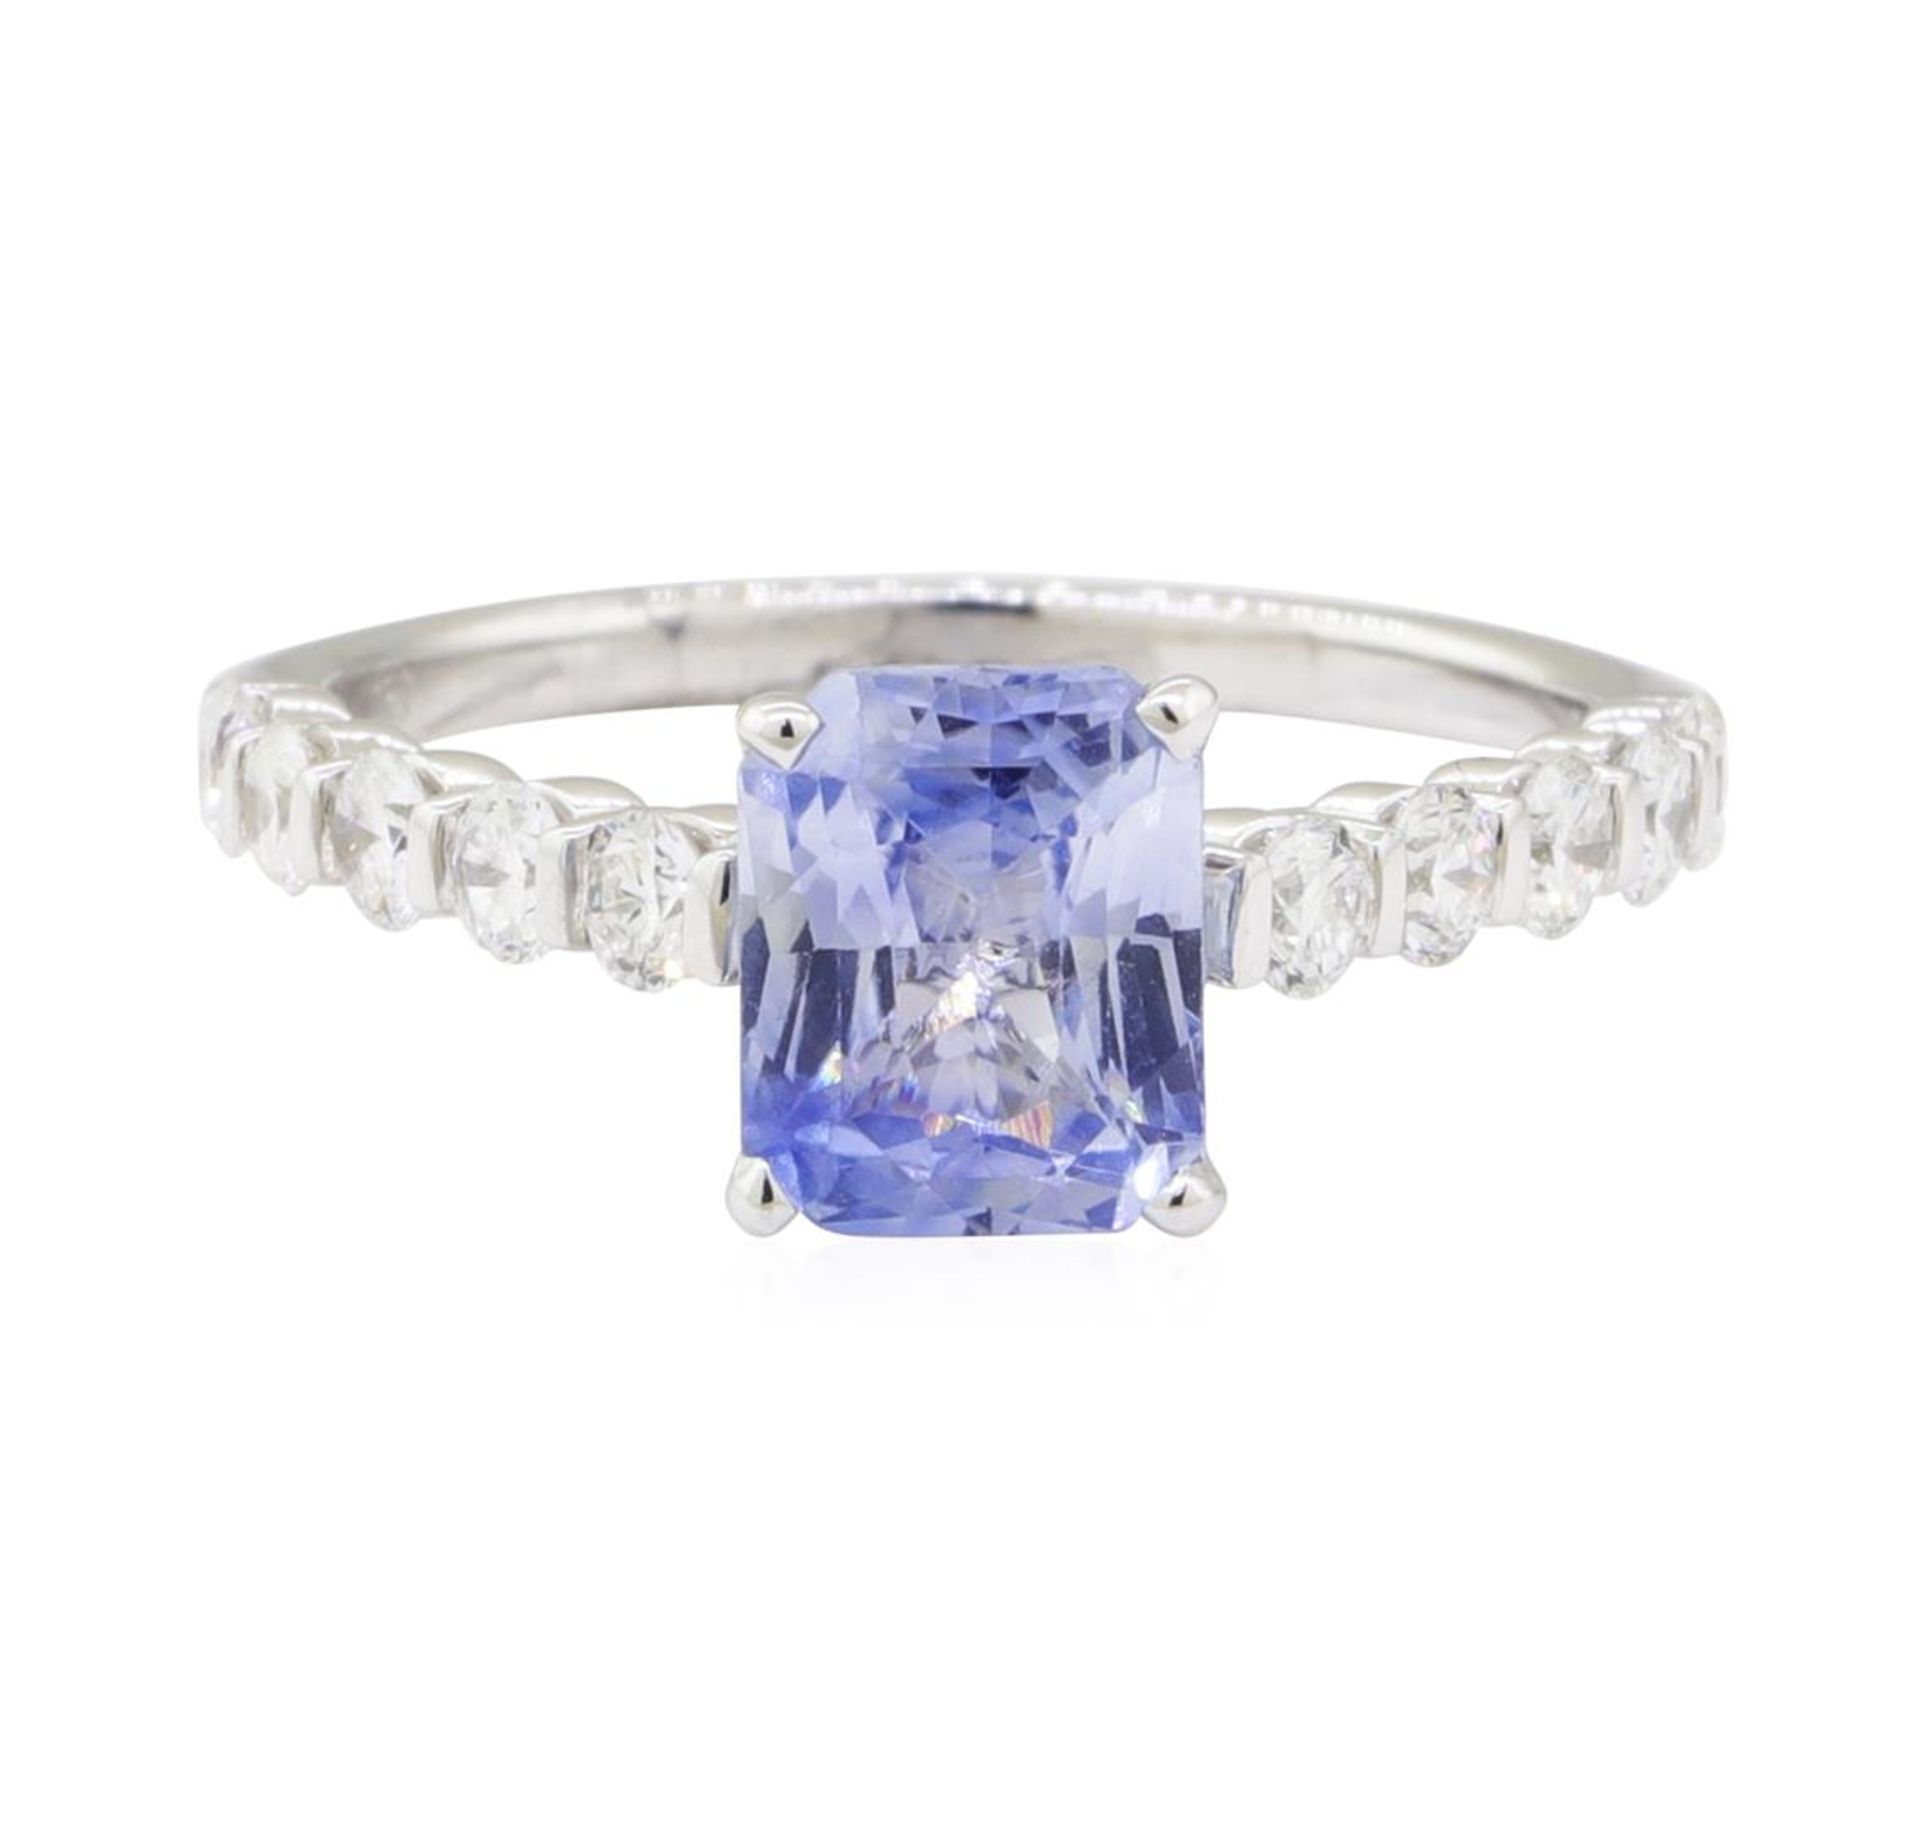 2.34ctw Sapphire and Diamond Ring - 18KT White Gold - Image 2 of 4